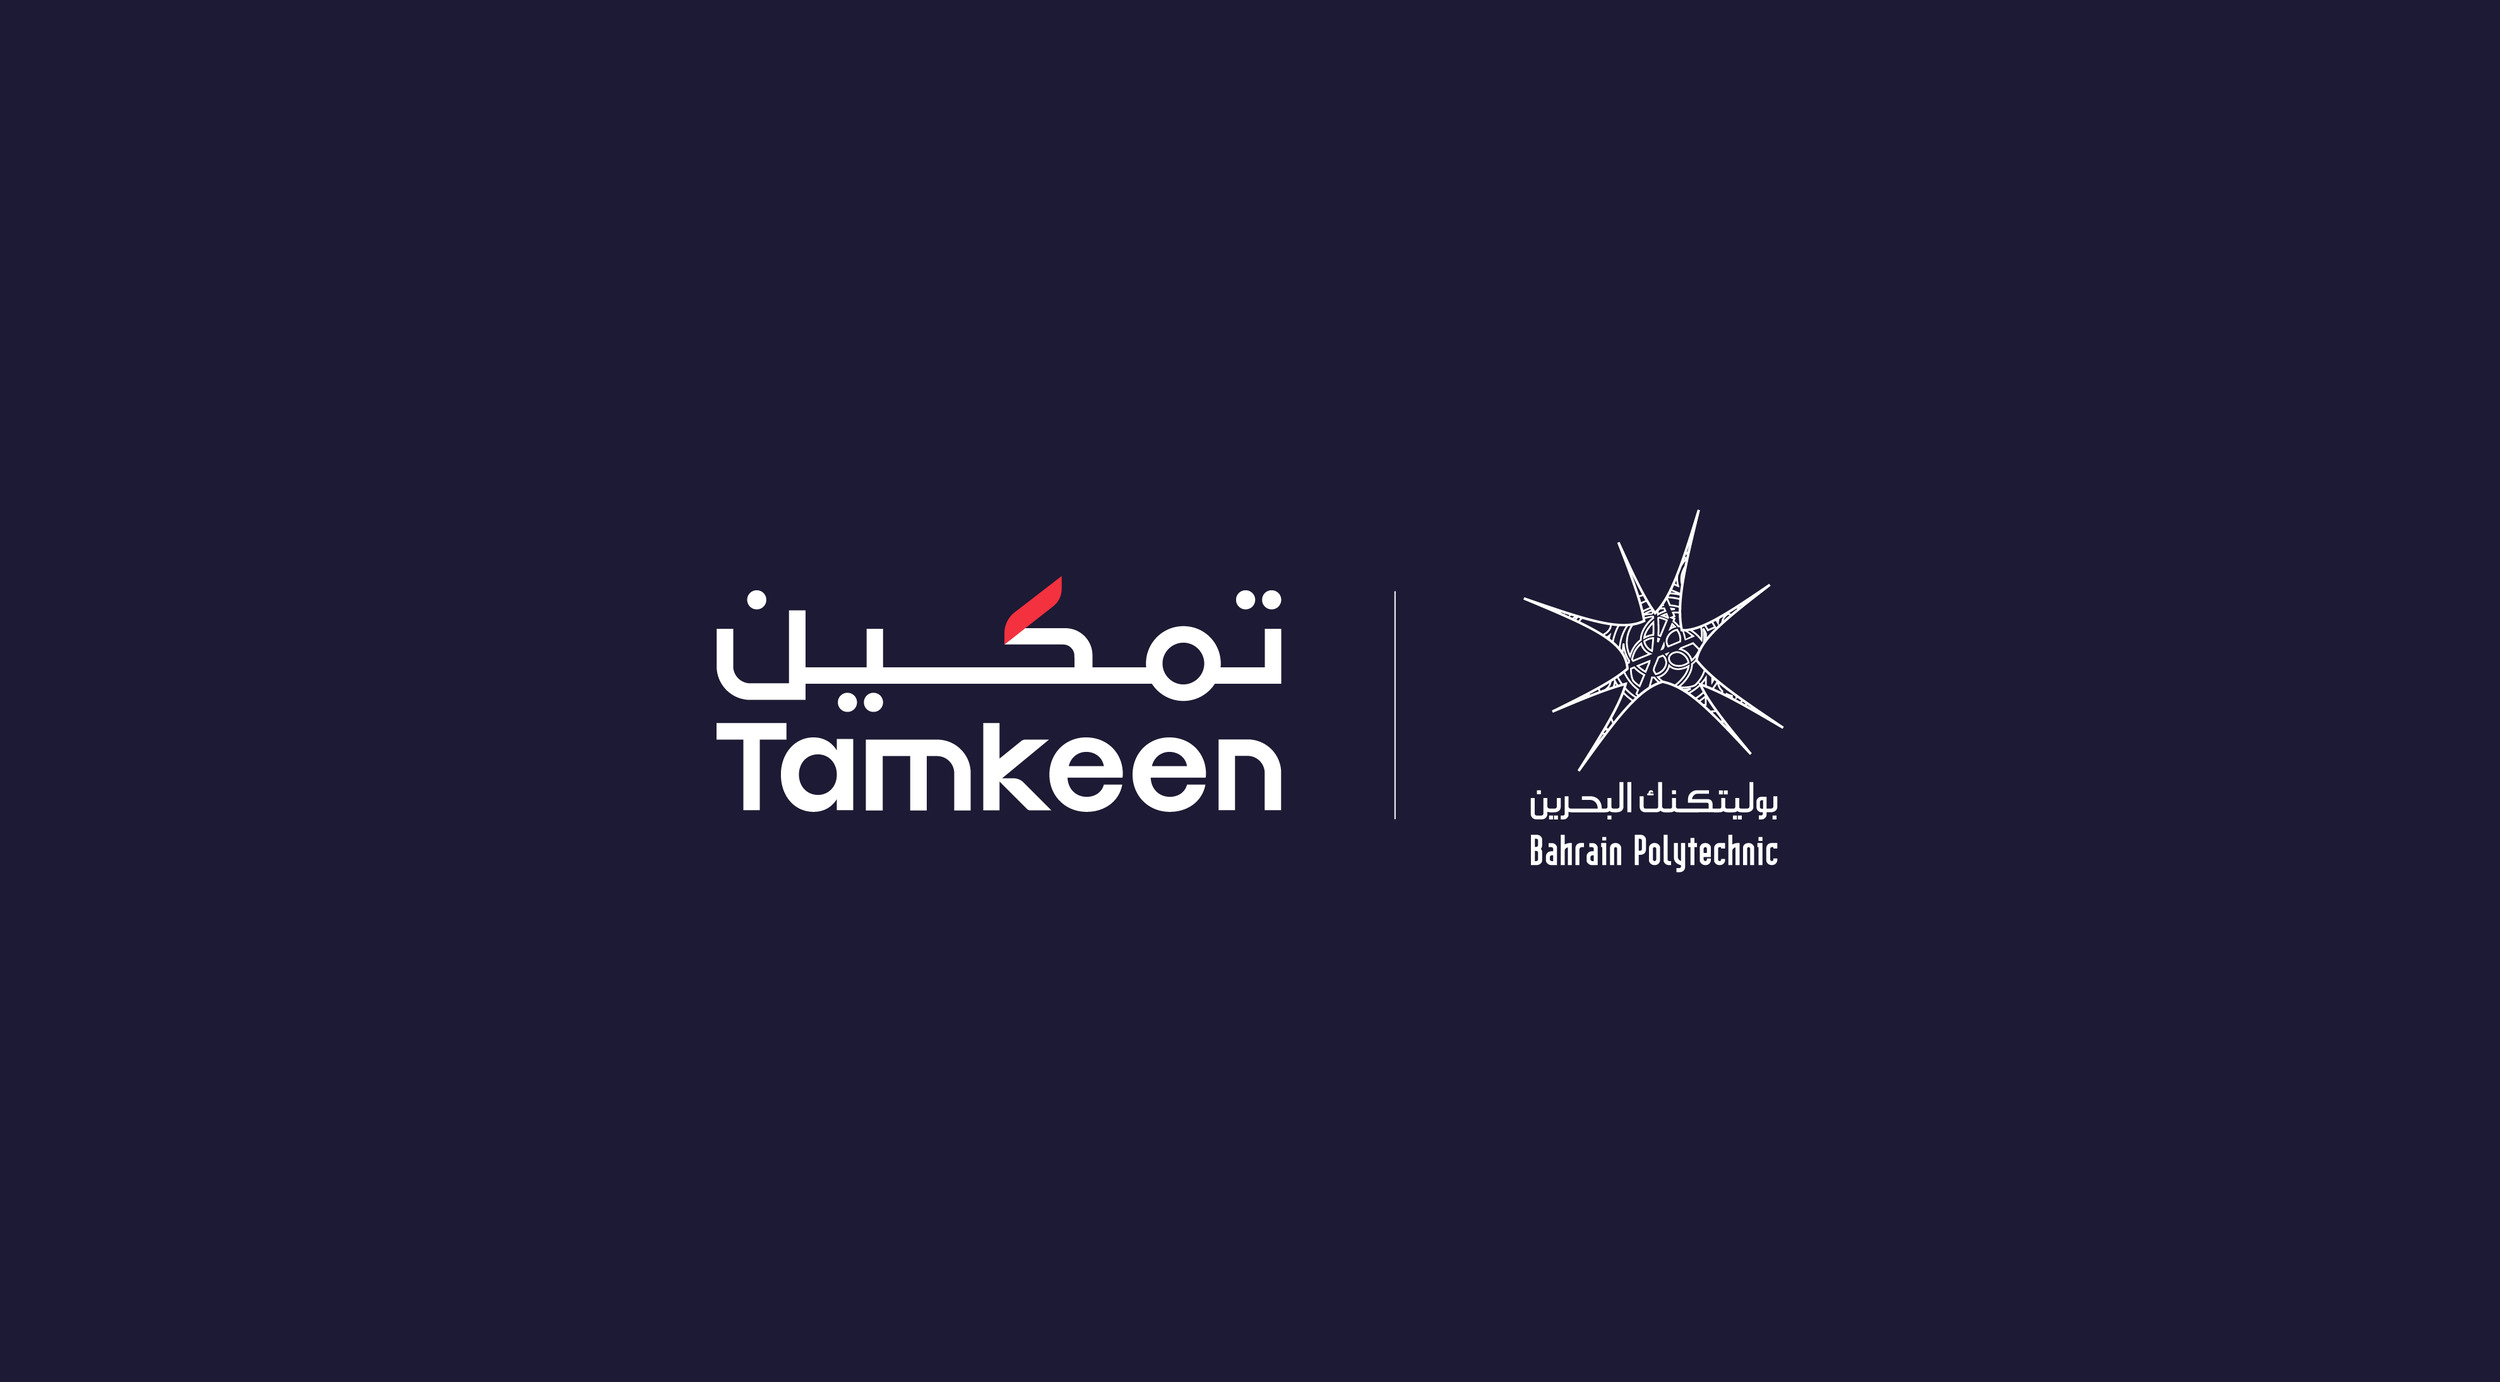 Tamkeen launches second phase of the Cloud Innovation Center (CIC) Program in collaboration with Bahrain Polytechnic